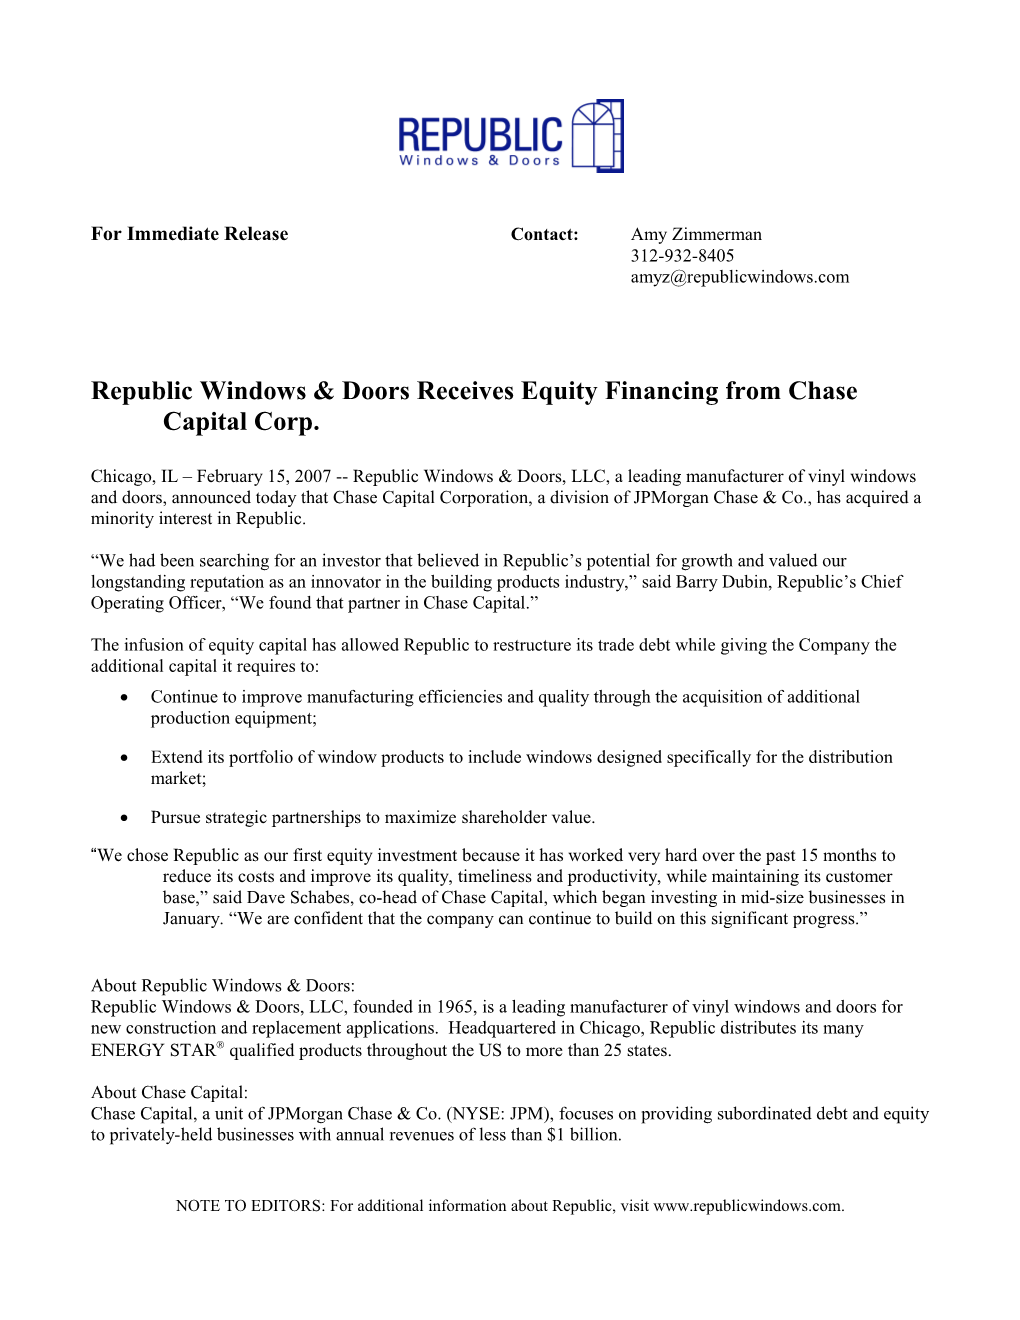 Republic Windows & Doors Receives Equity Financing from Chase Capital Corp